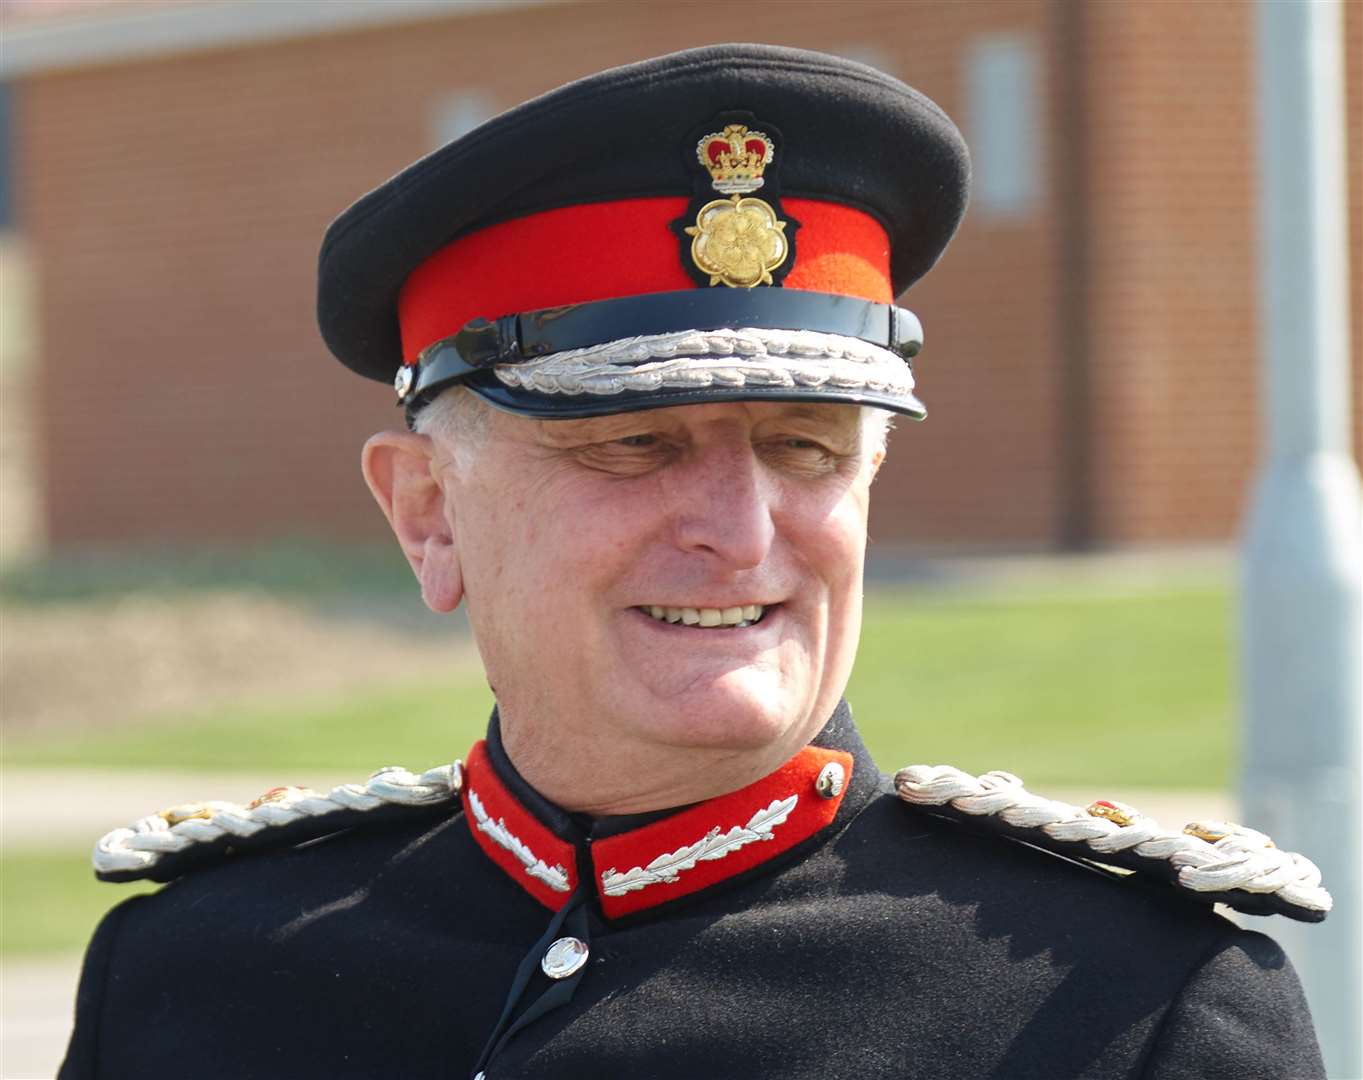 Viscount De L’Isle was the Lord-Lieutenant of Kent from September 1, 2011 to April 21, 2020. Picture: Steve Hickey